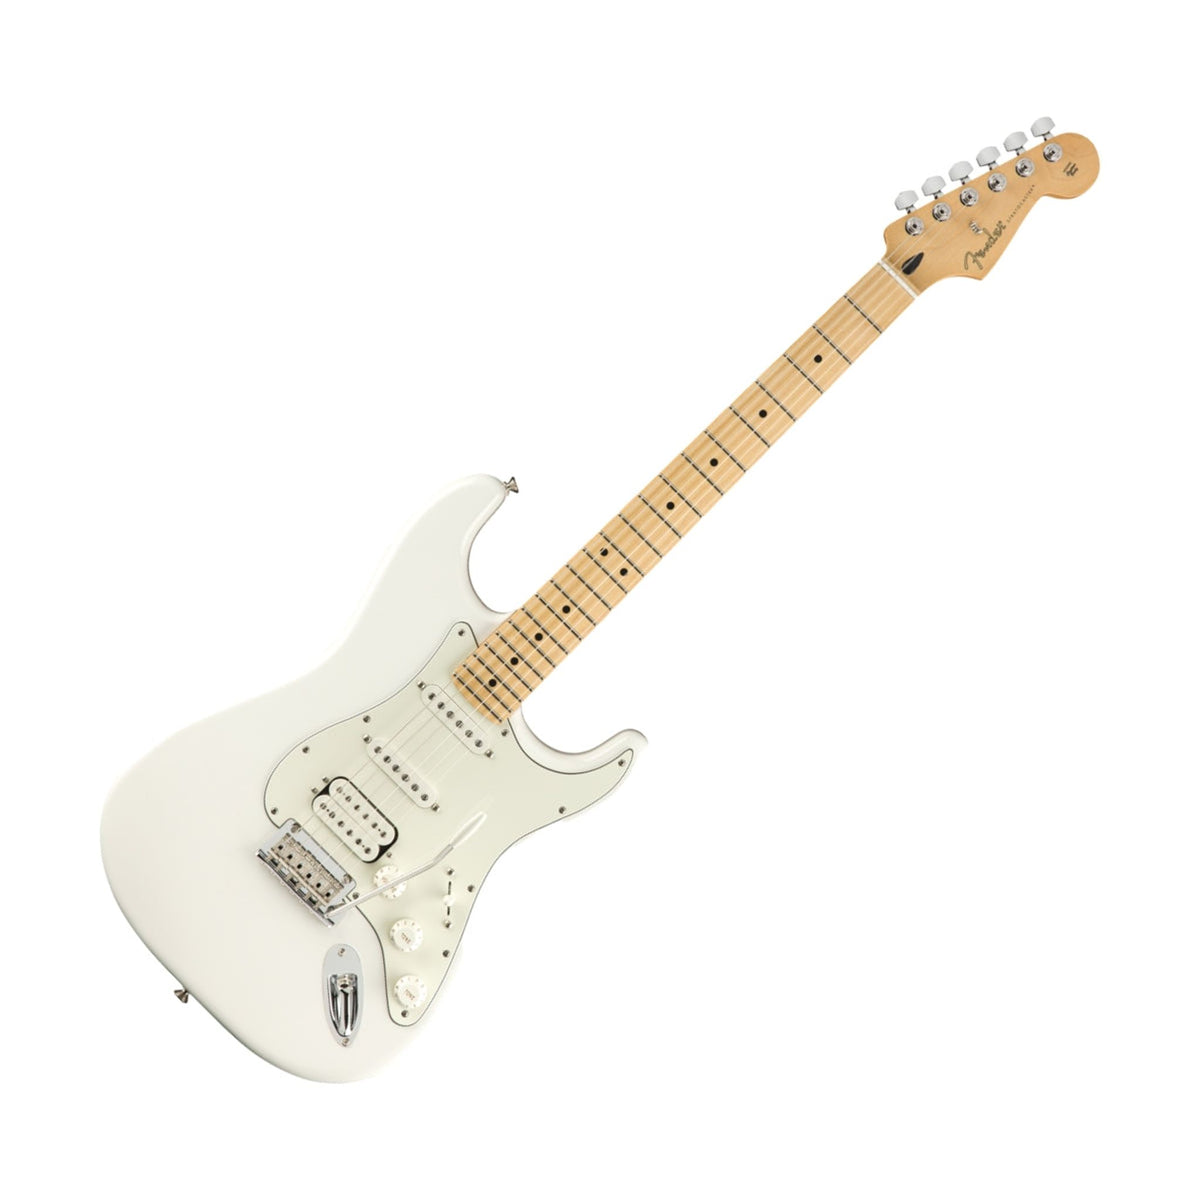 The Fender Stratocaster Player Series is sonically flexible and packed with authentic Fender feel and style, with some great modern features. 